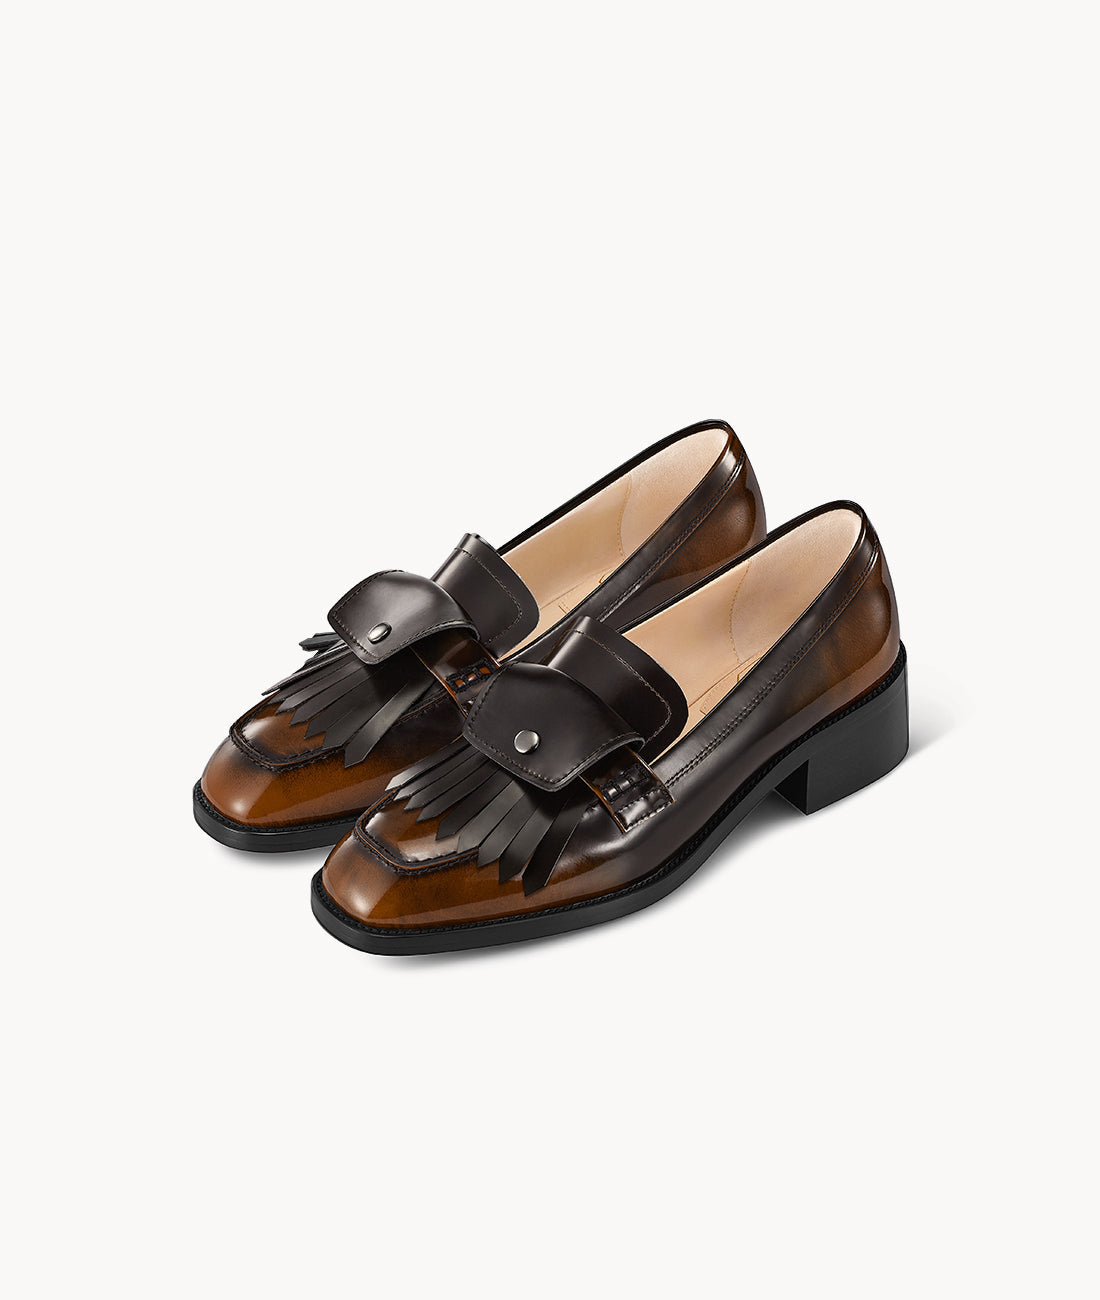 Brown Concealed Tassel Buckle for loafers